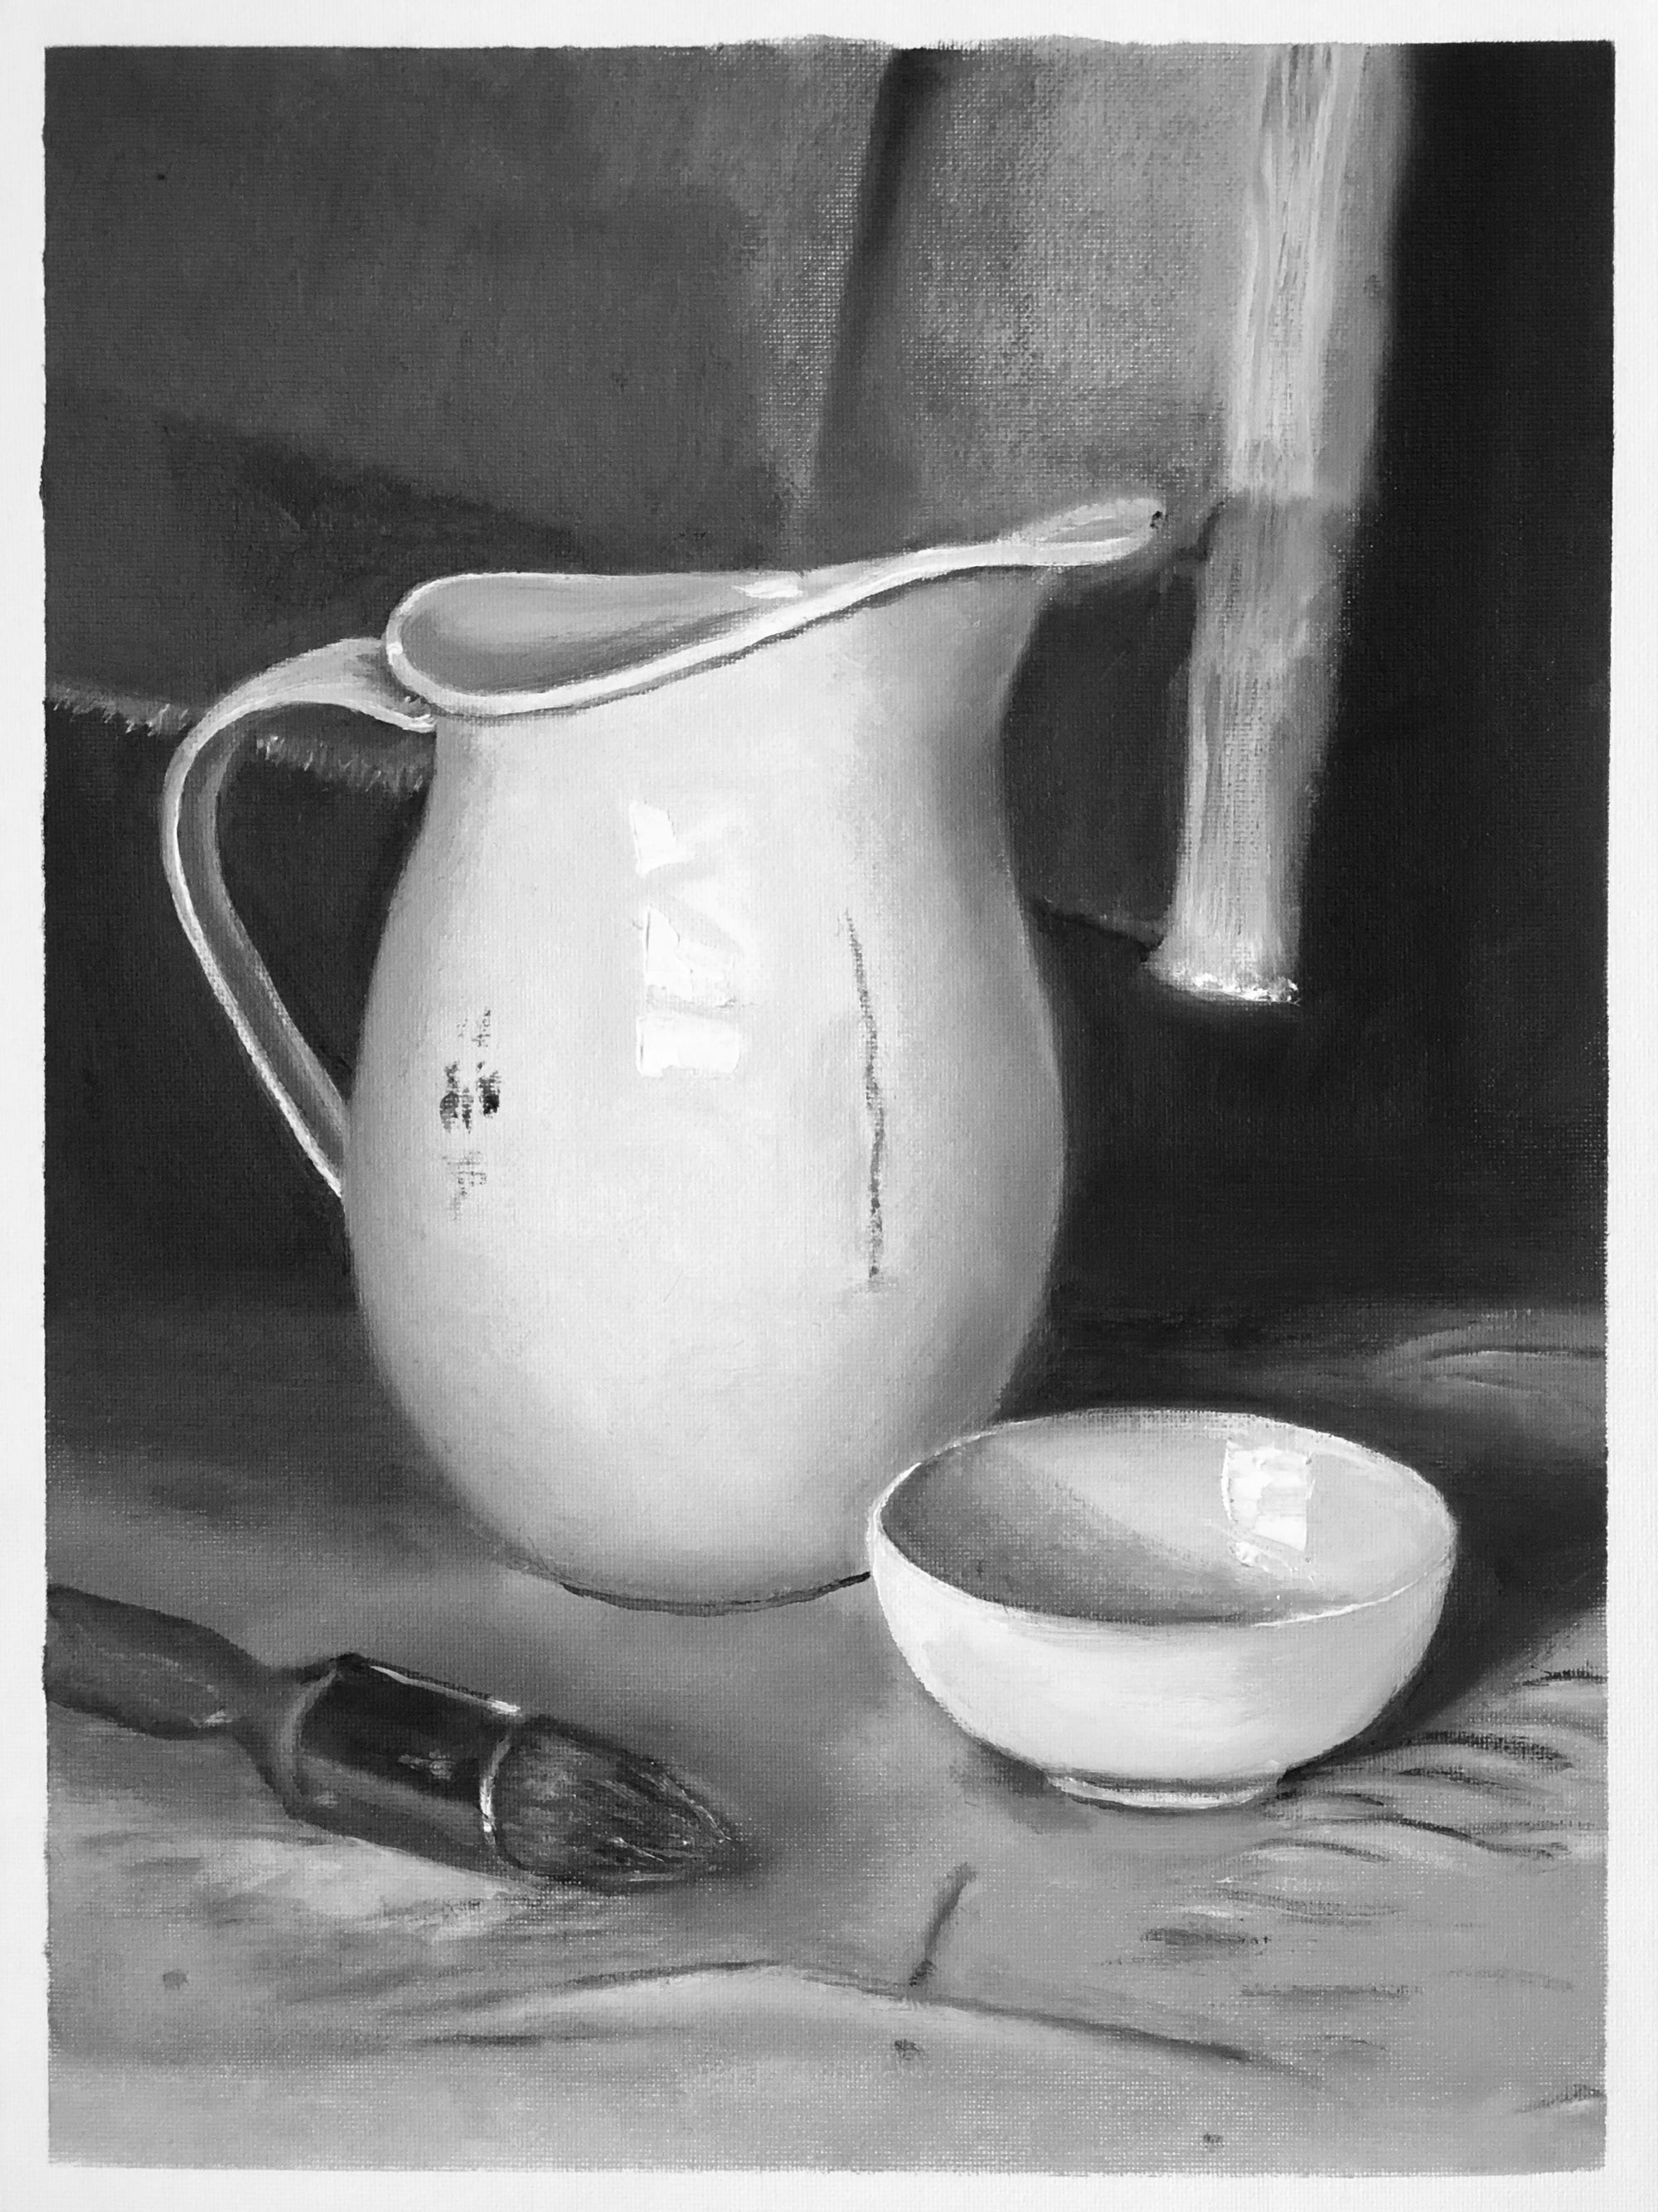 Momento II  Still Life with Water Jug - Oil on Canvas  - 260 x 380 mm - SOLD